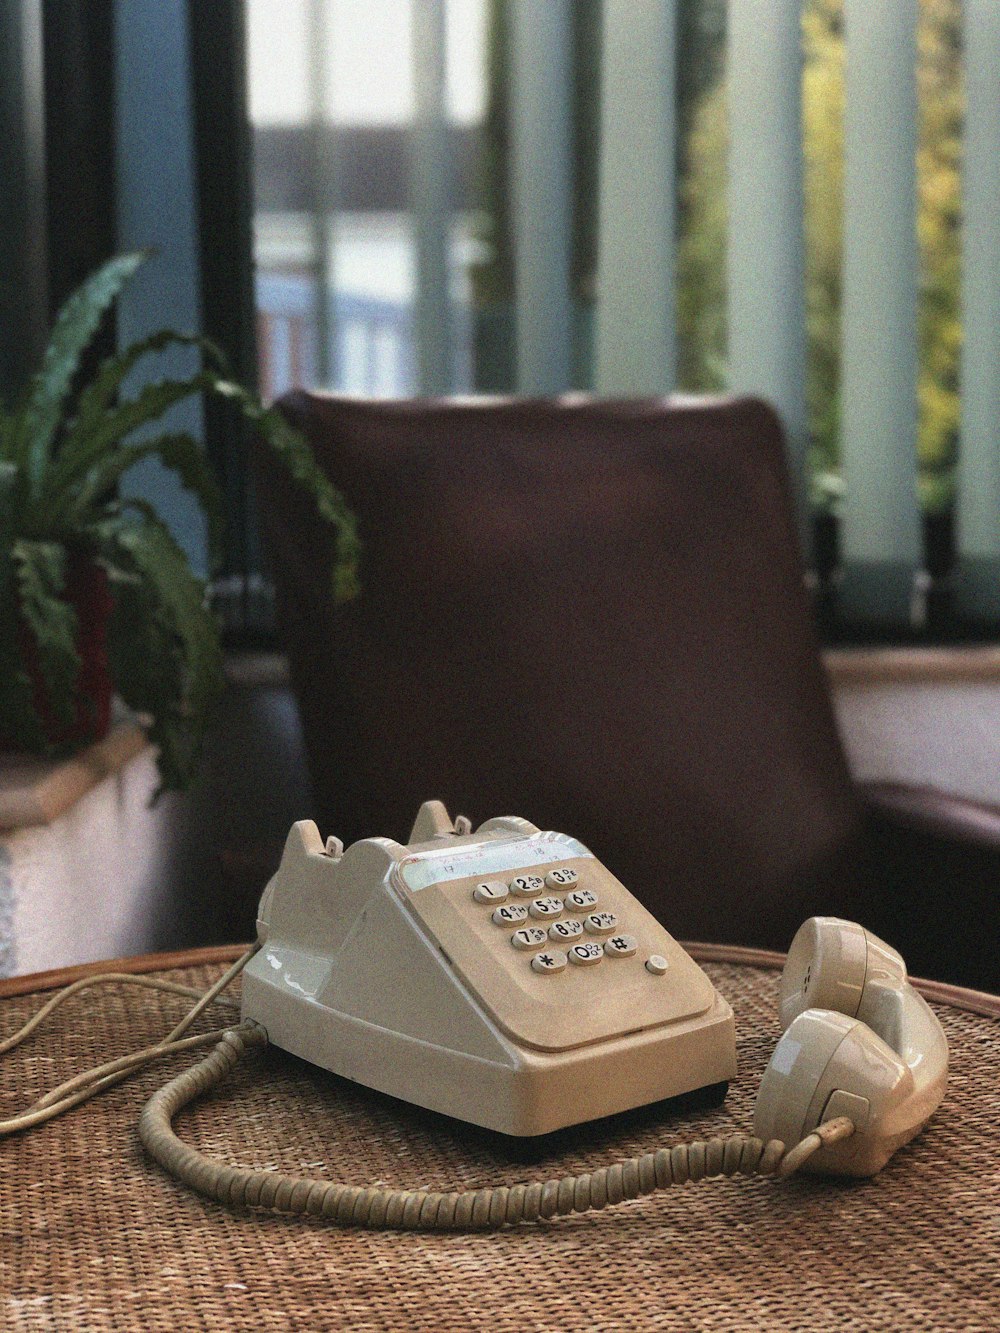 white and gray ip desk phone on brown wooden table